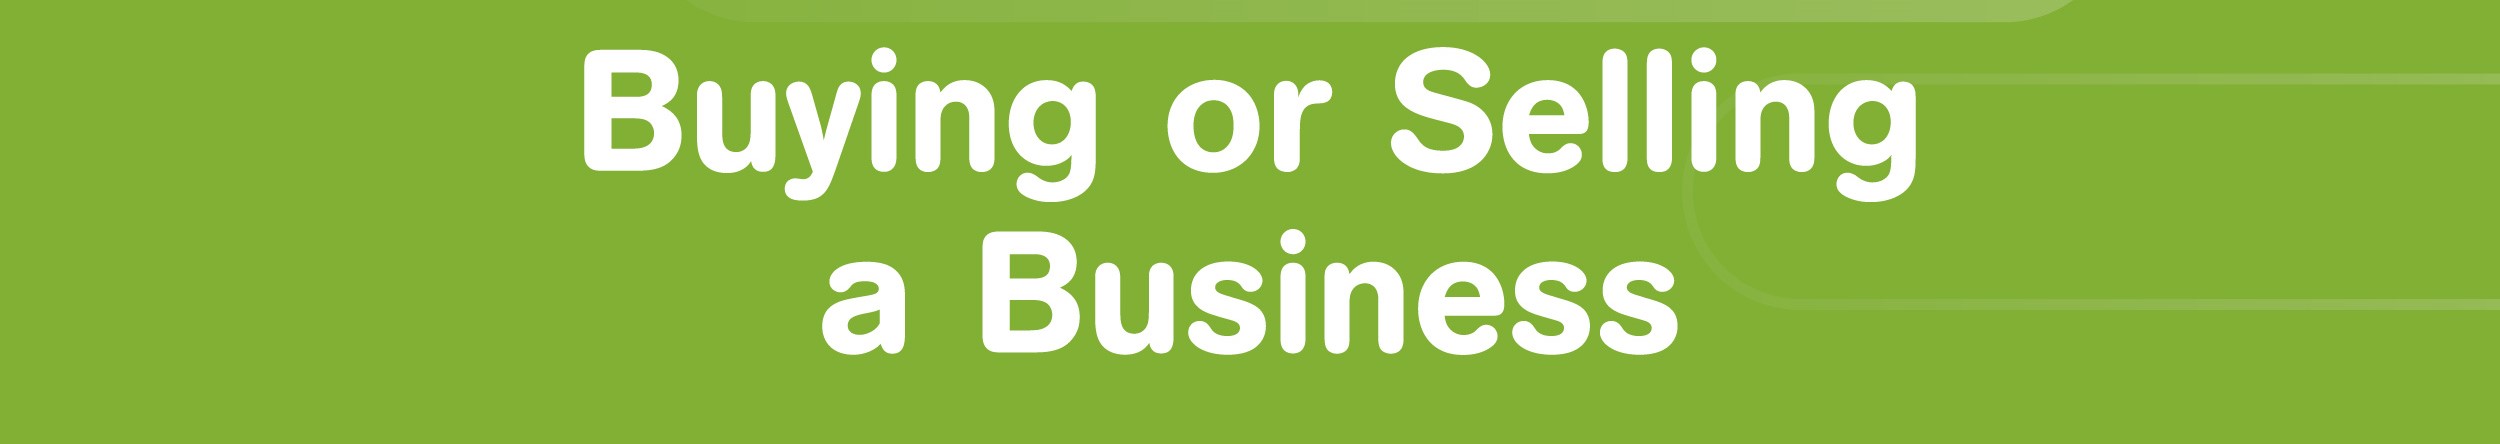 How to Buy and Sell a Business Online: Leveraging Business Deals Marketplace